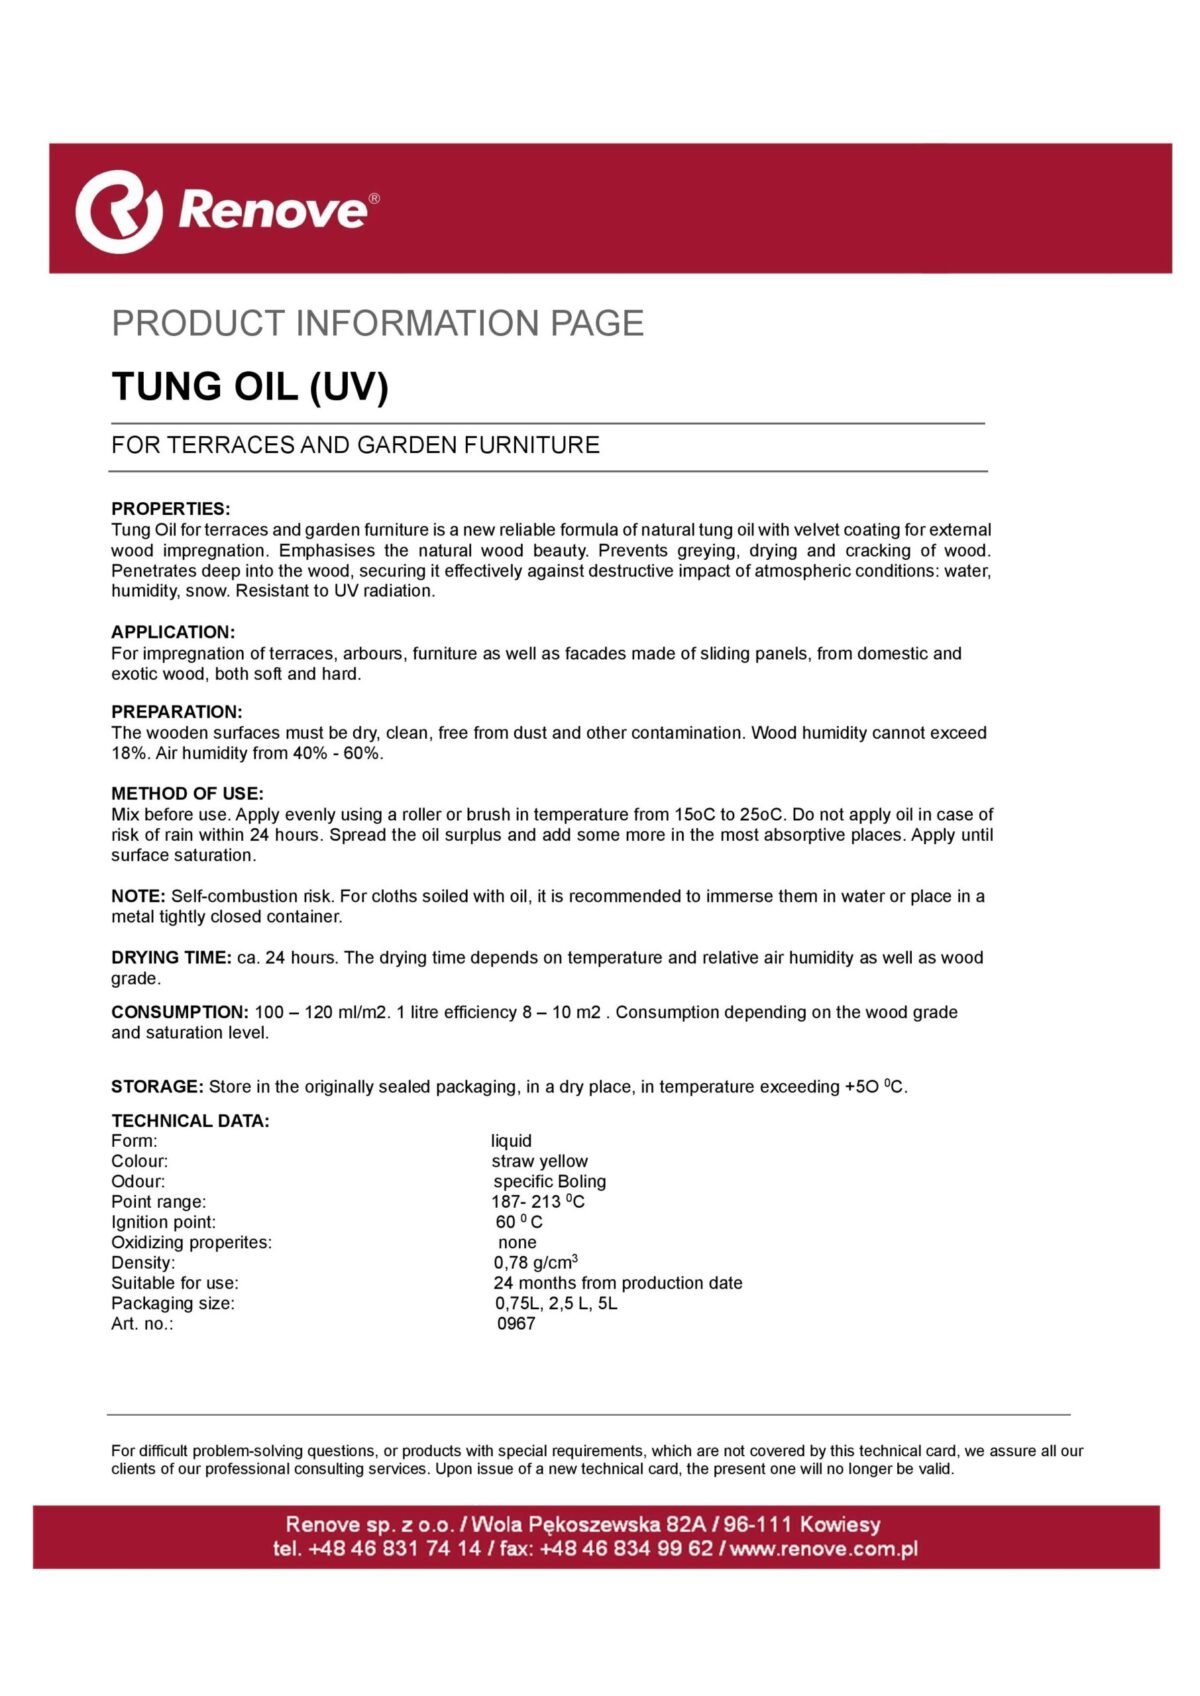 Tung Oil Renove Product Information